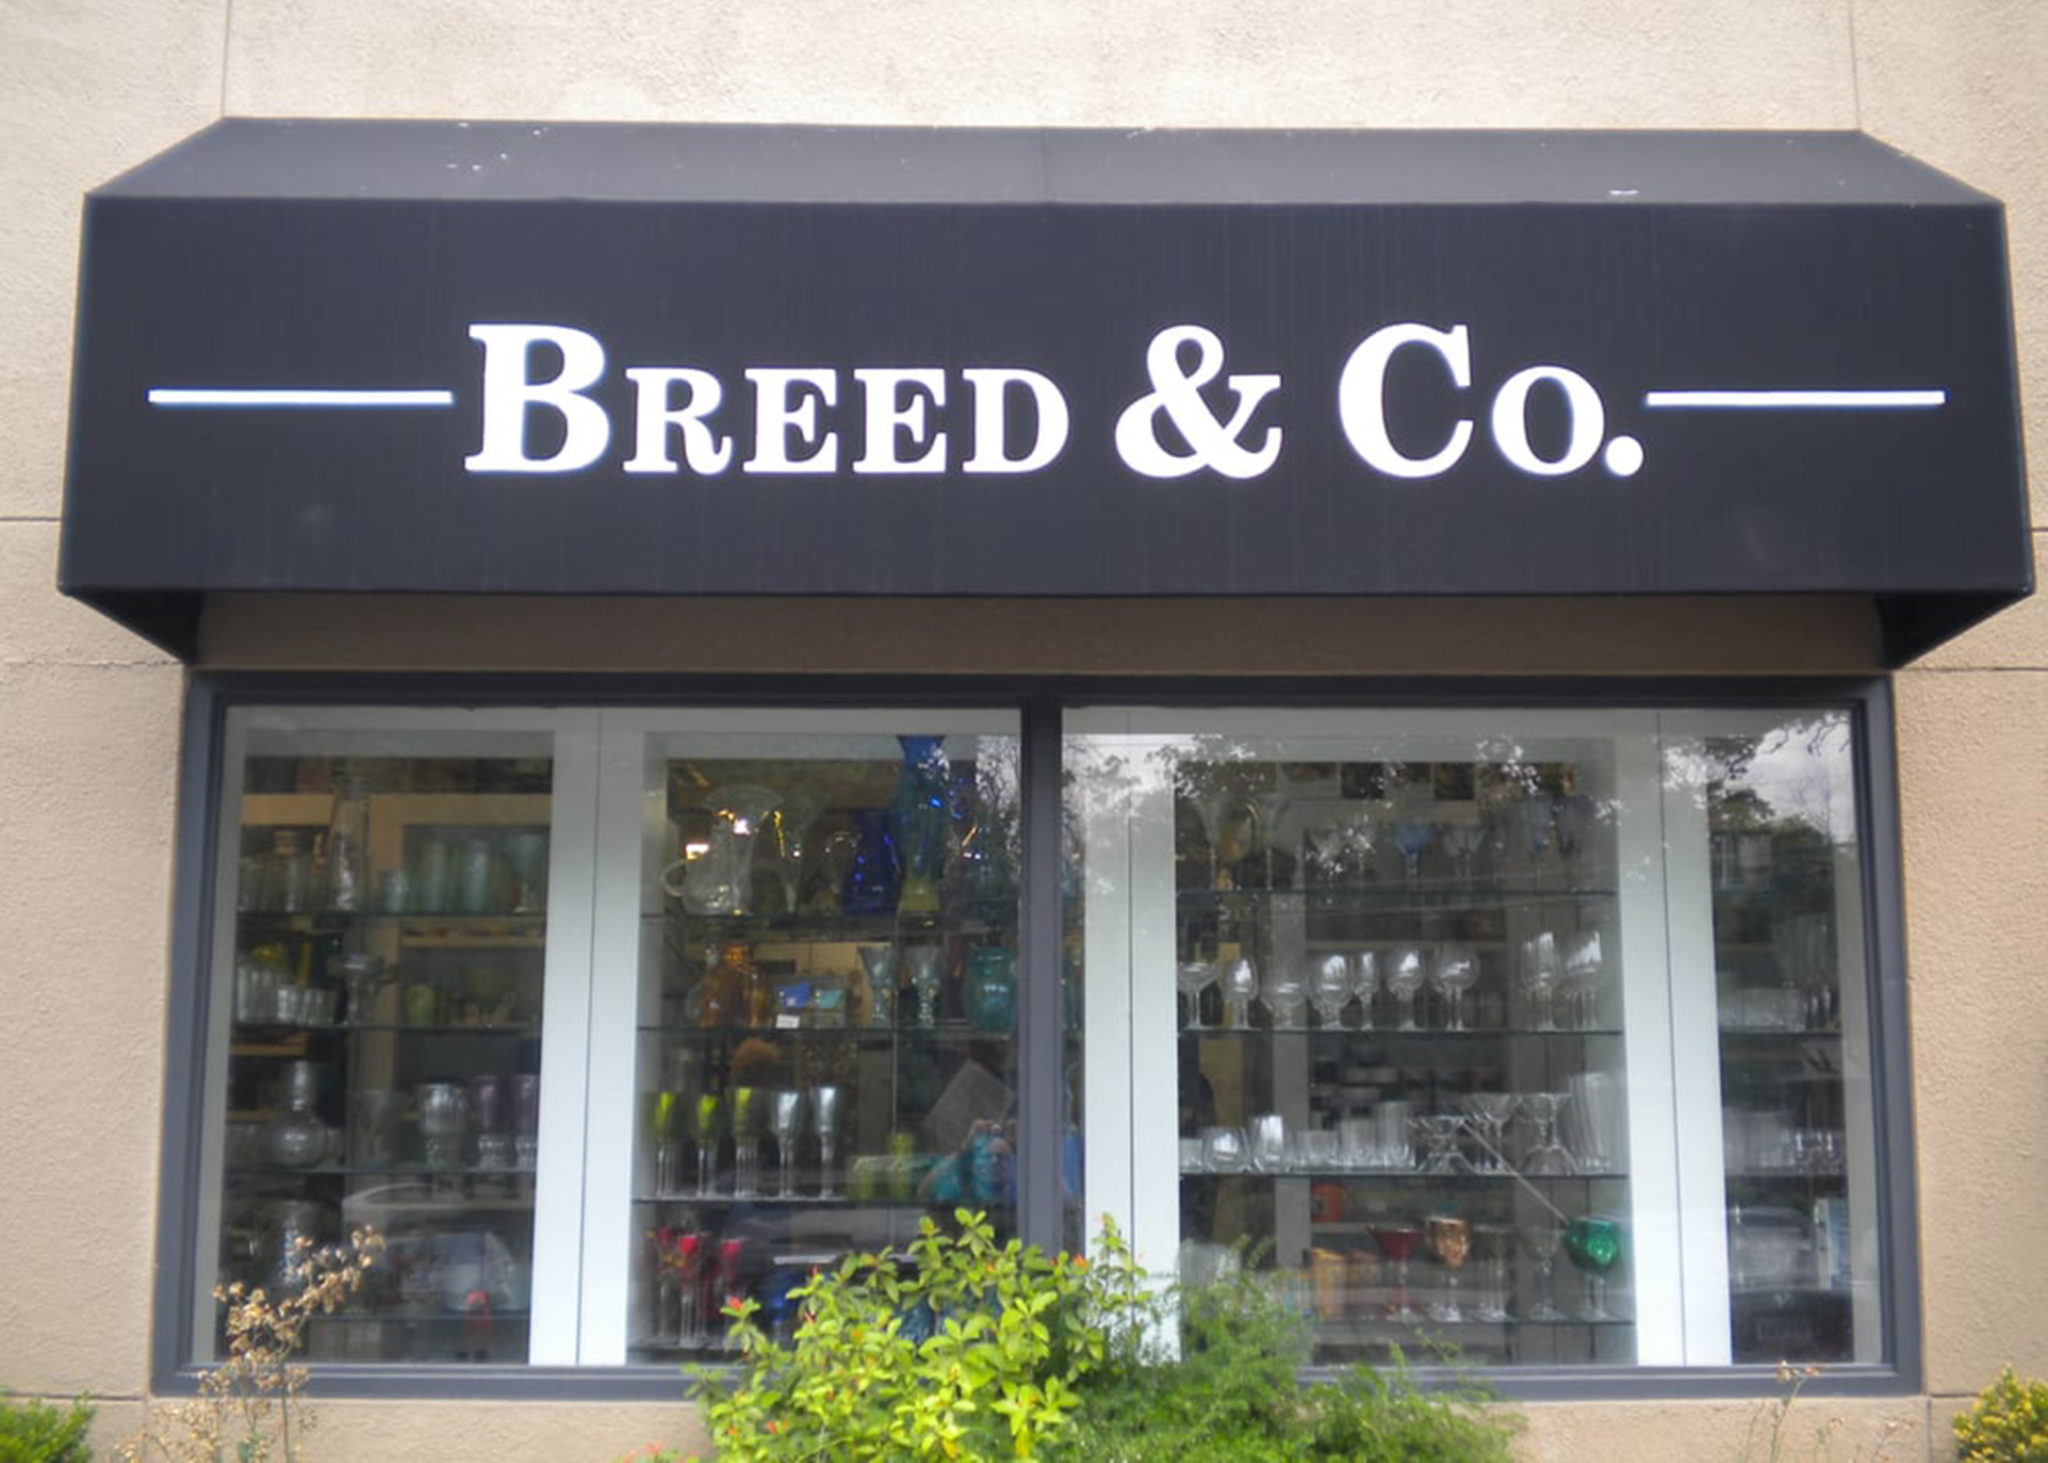 Breed & Co awning